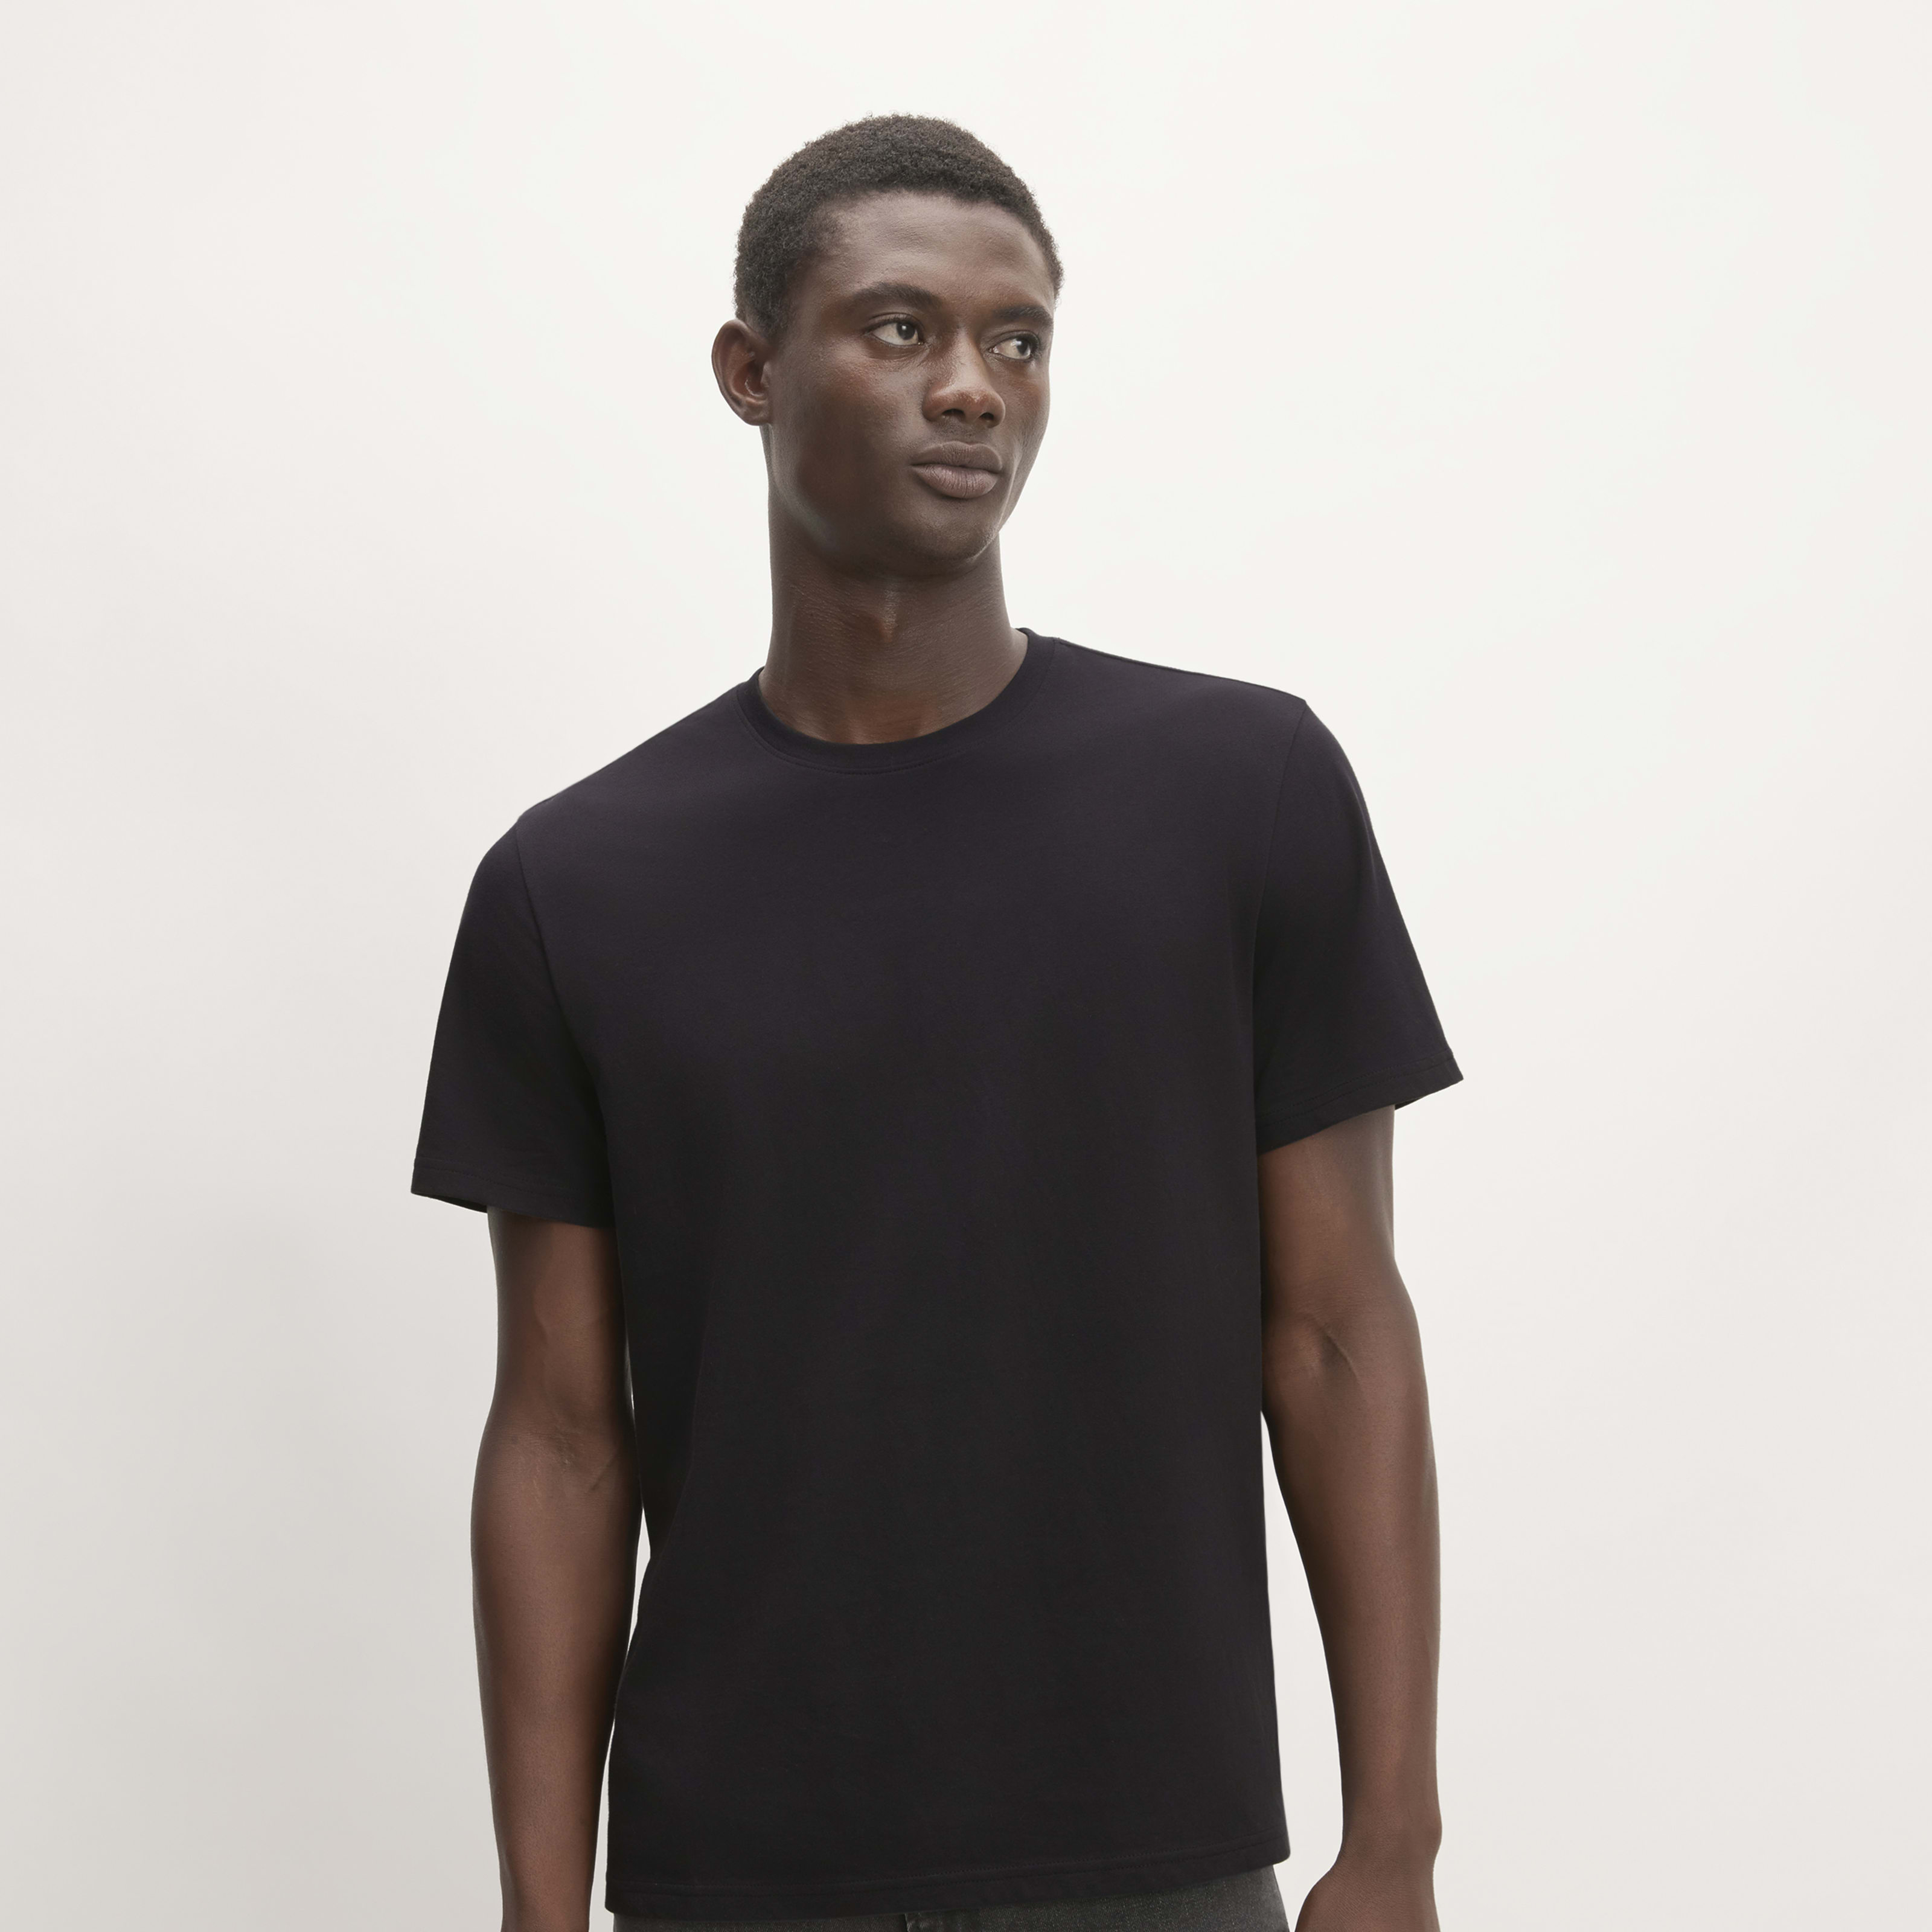 men's essential organic crew t-shirt by everlane in black, size xs